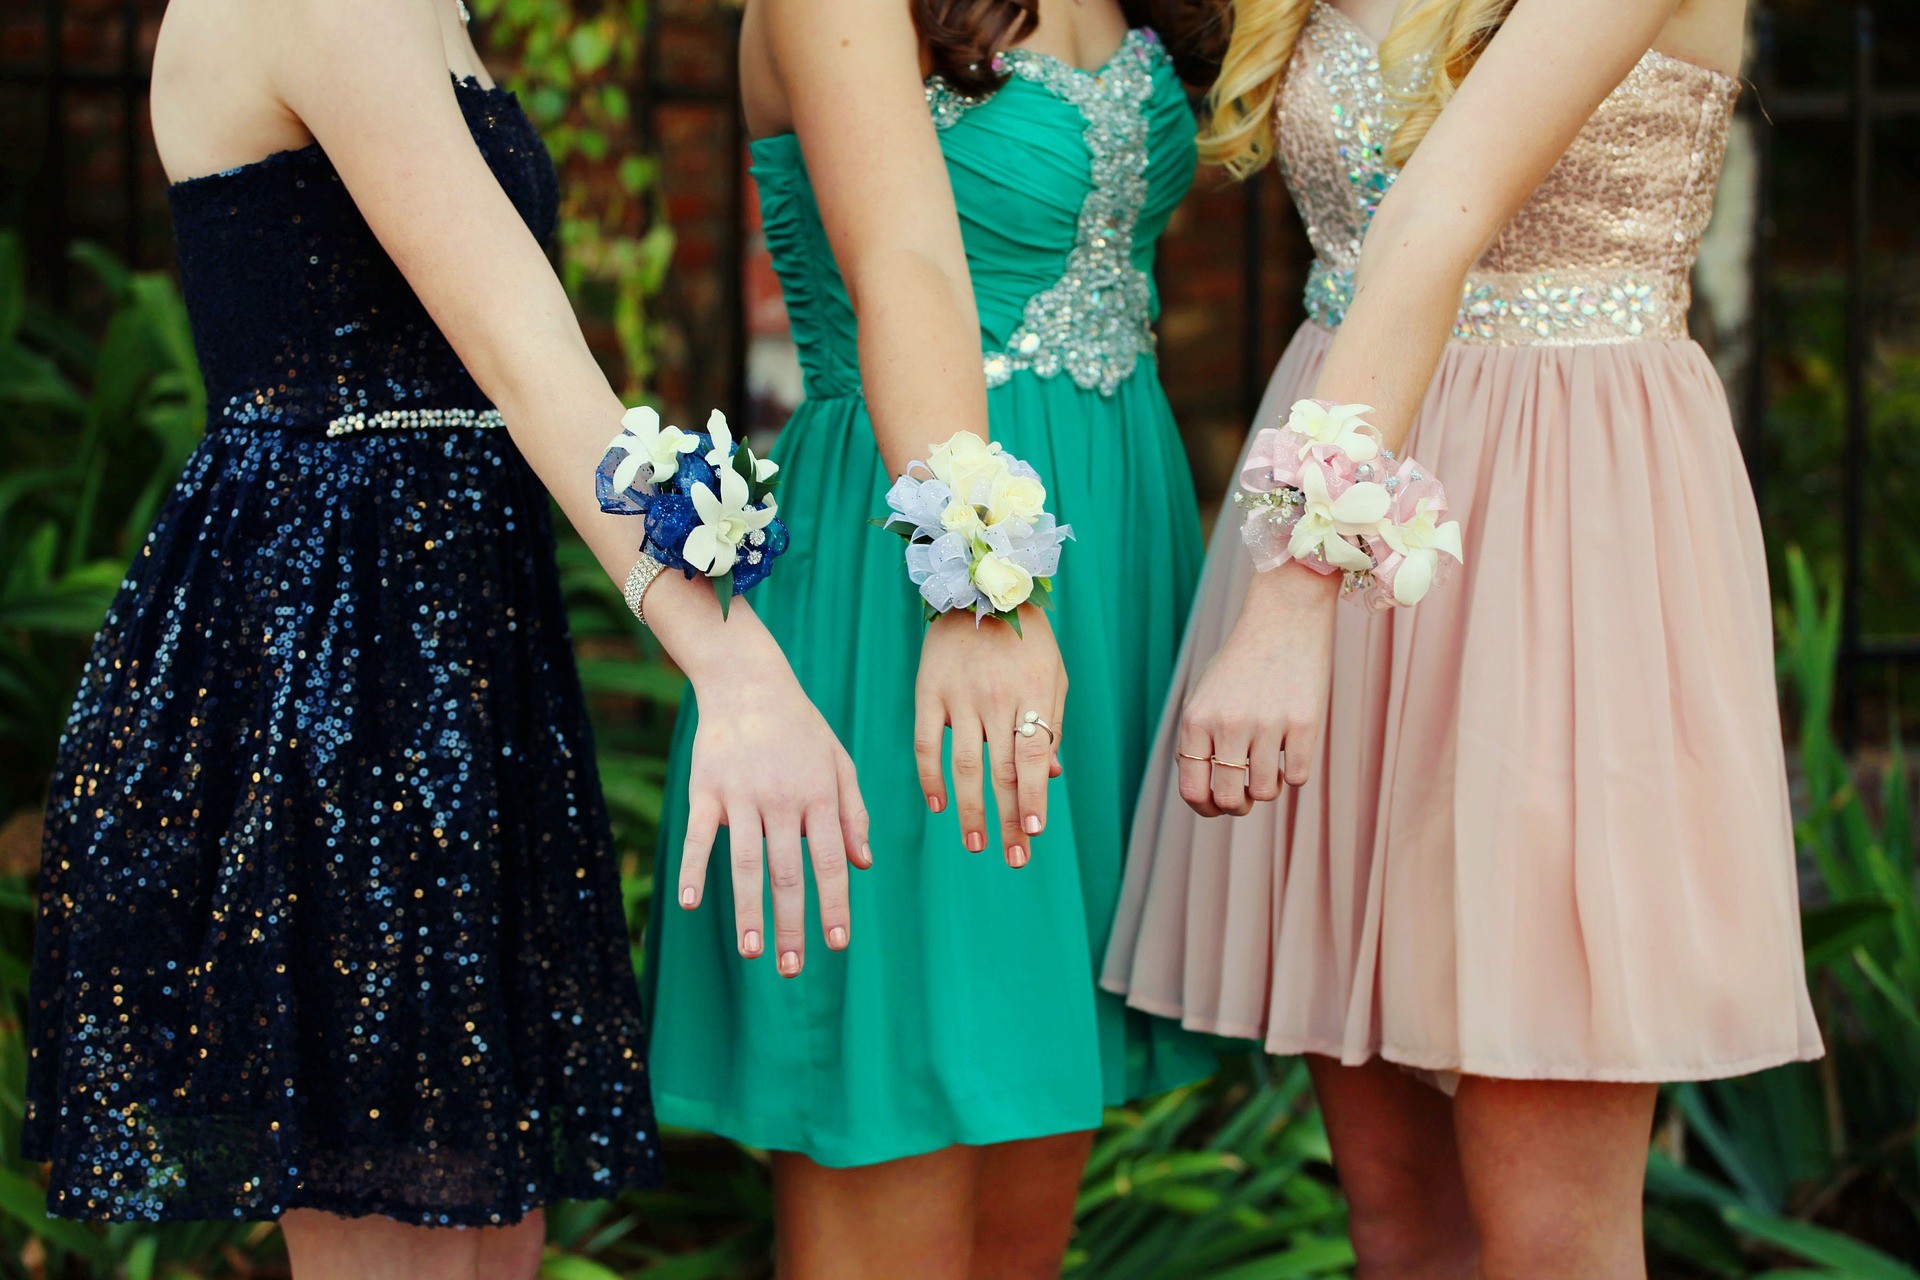 Prom Dress & Accessories Ideas for Your Perfect Look